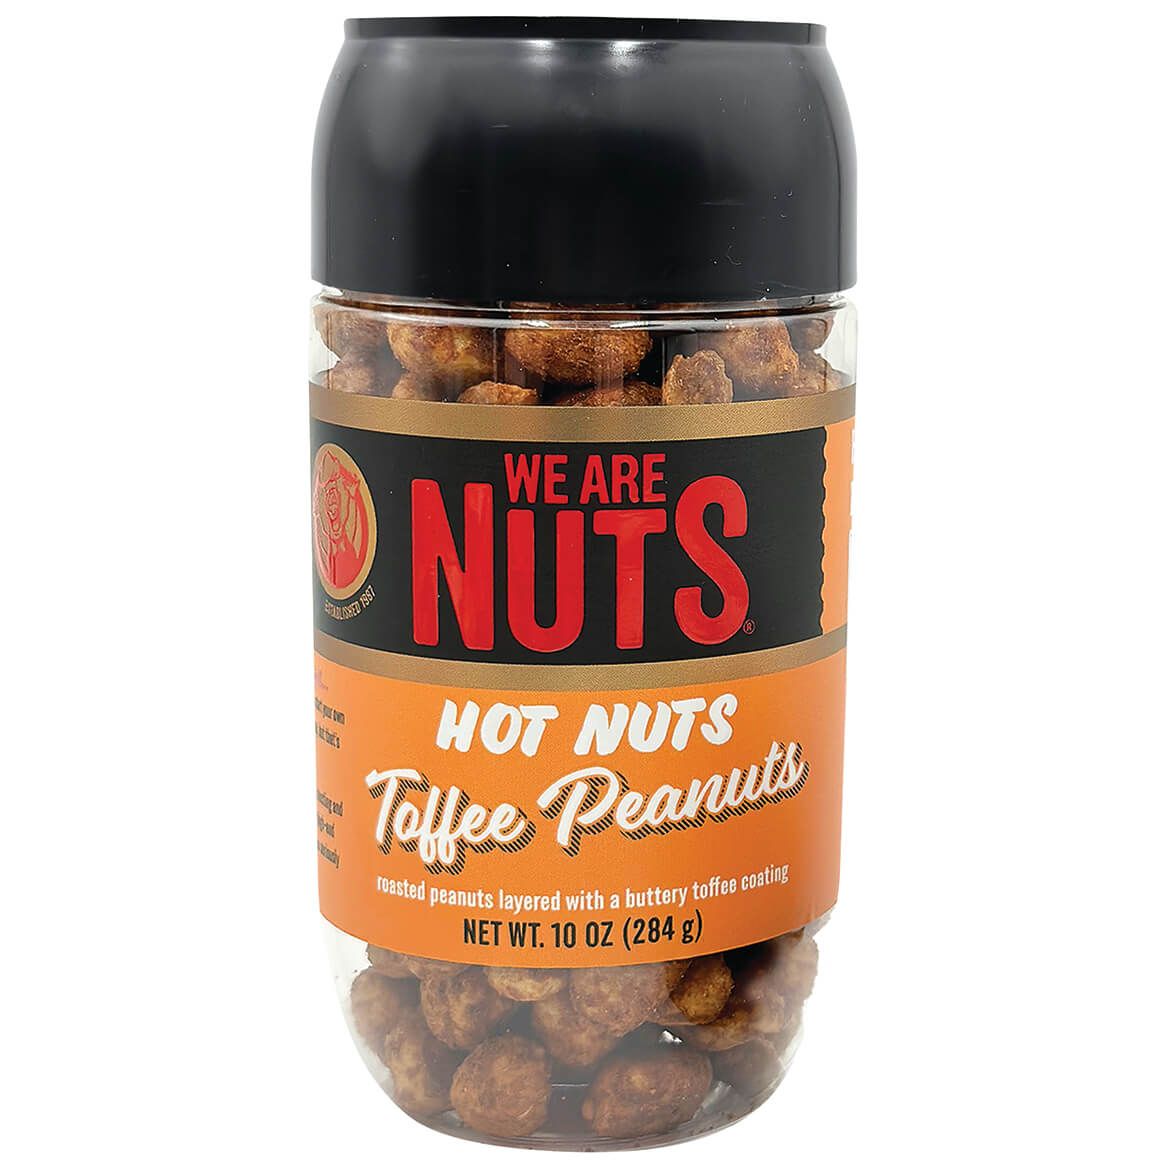 We Are Nuts Toffee Peanuts, Hot Nuts + '-' + 376687